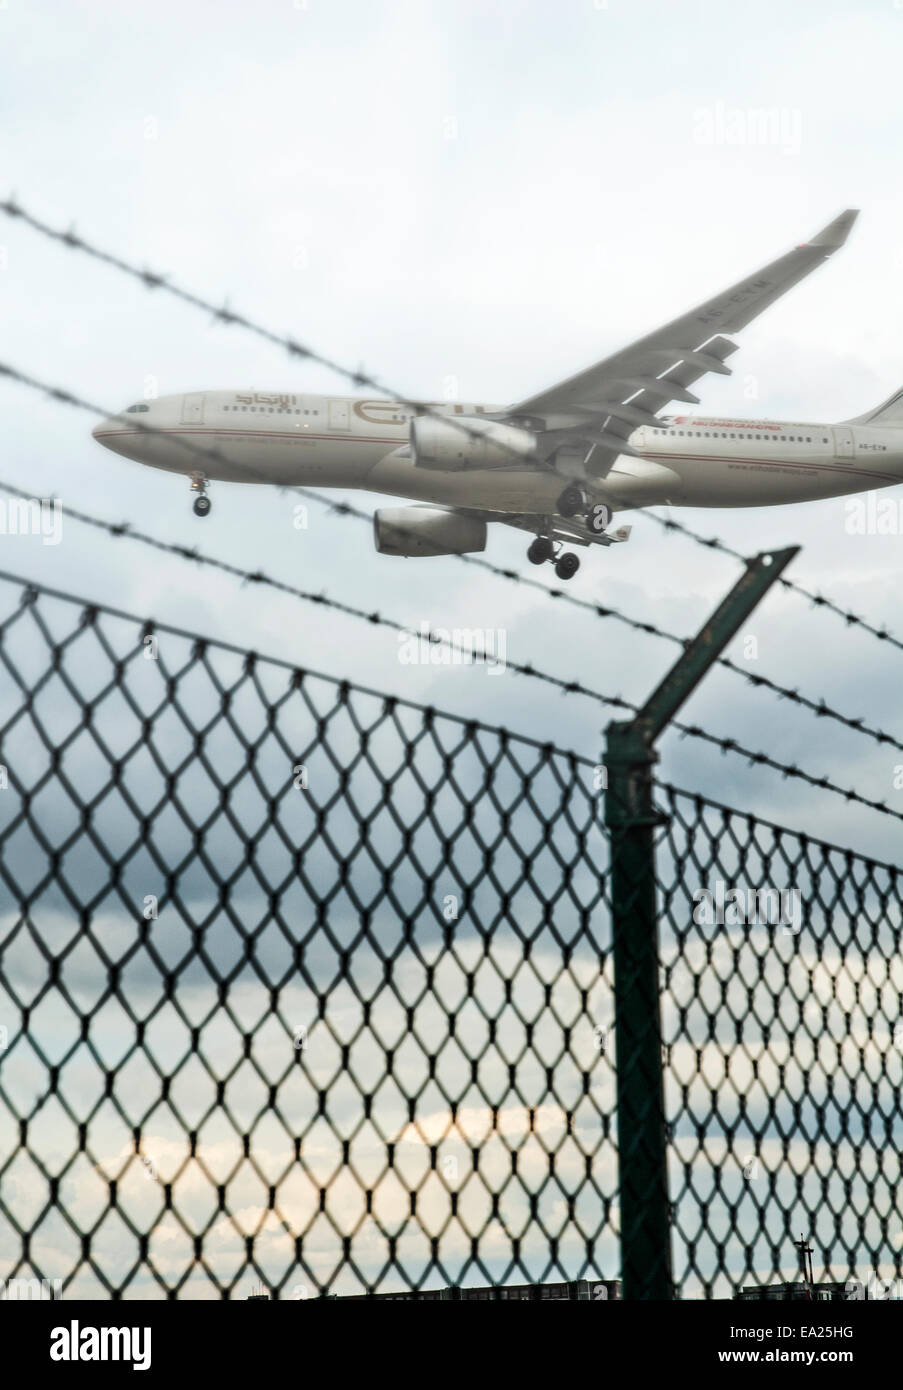 A plane from Etihad Airways flies over the fence from the grounds of the Frankfurt airport shortly before touchdown. Stock Photo